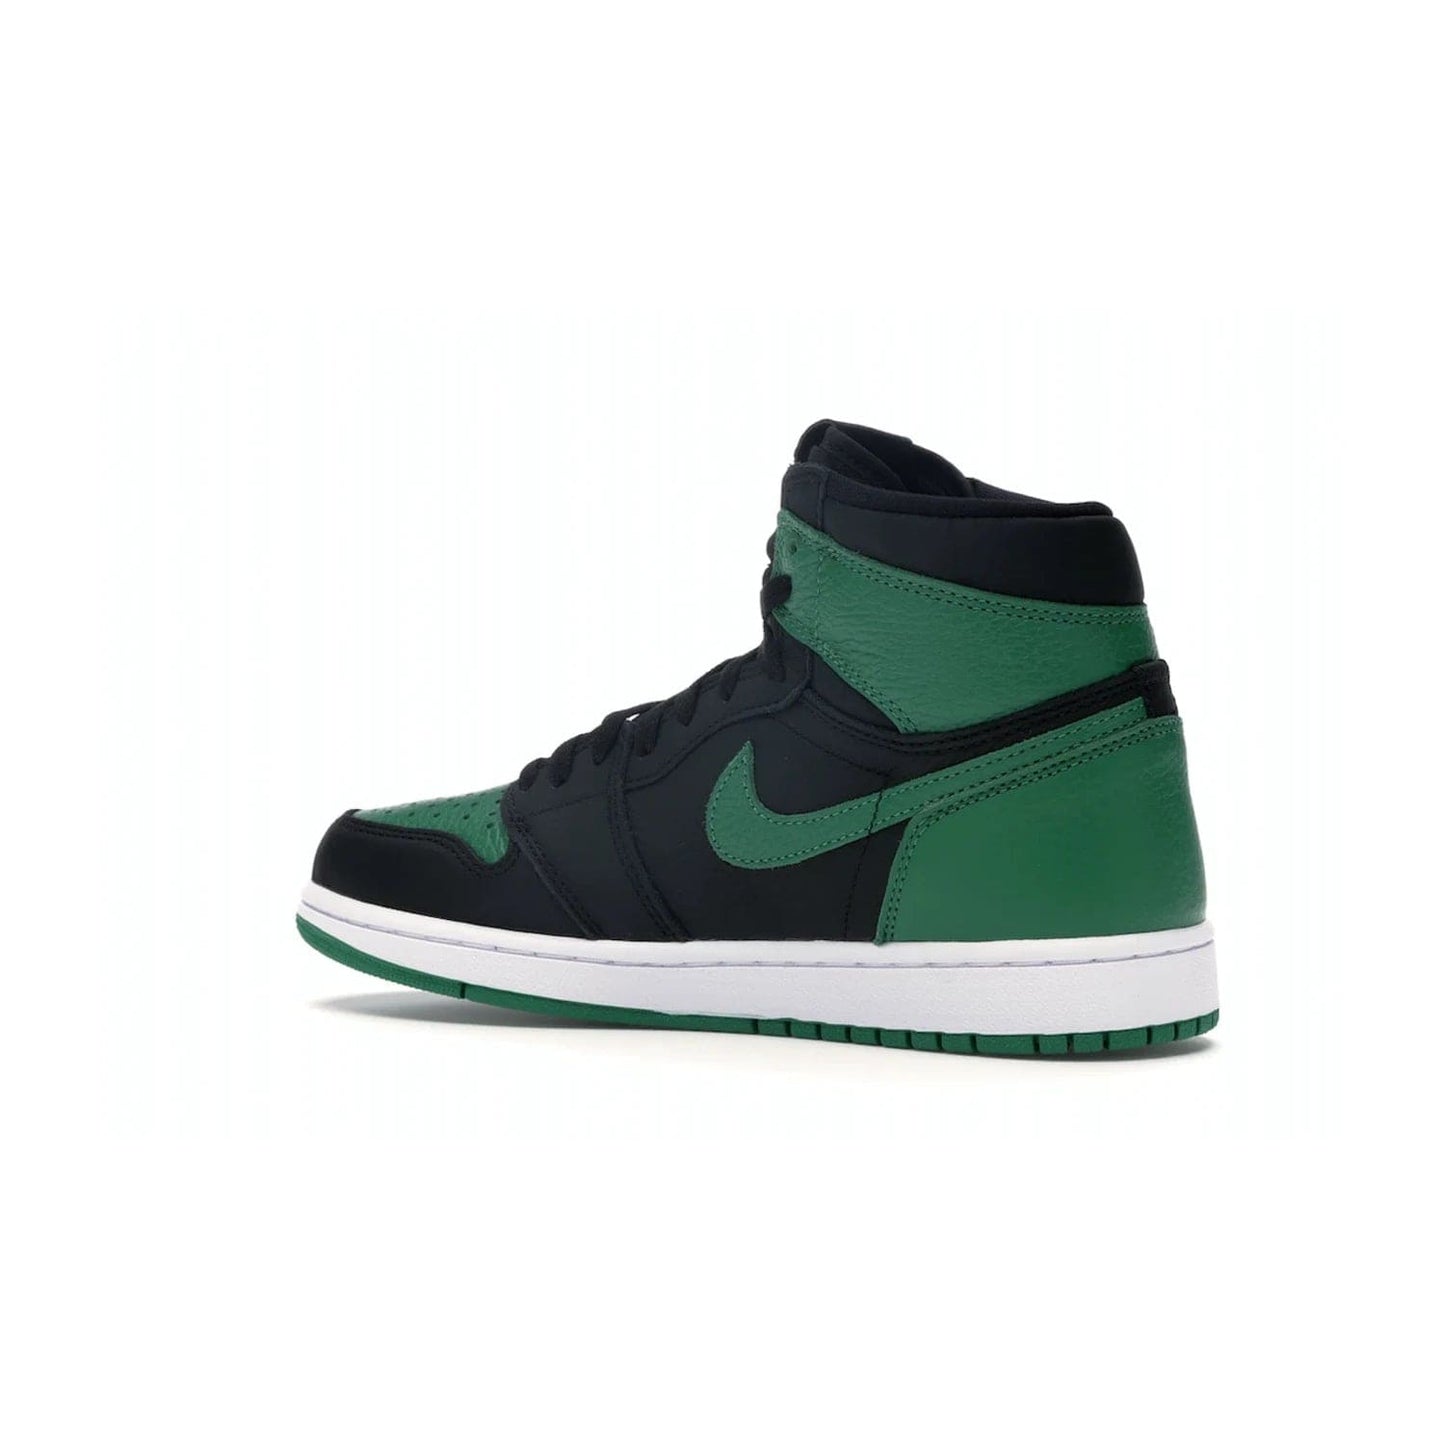 Jordan 1 Retro High Pine Green Black - Image 22 - Only at www.BallersClubKickz.com - Step into fresh style with the Jordan 1 Retro High Pine Green Black. Combining a black tumbled leather upper with green leather overlays, this sneaker features a Gym Red embroidered tongue tag, sail midsole, and pine green outsole for iconic style with a unique twist.